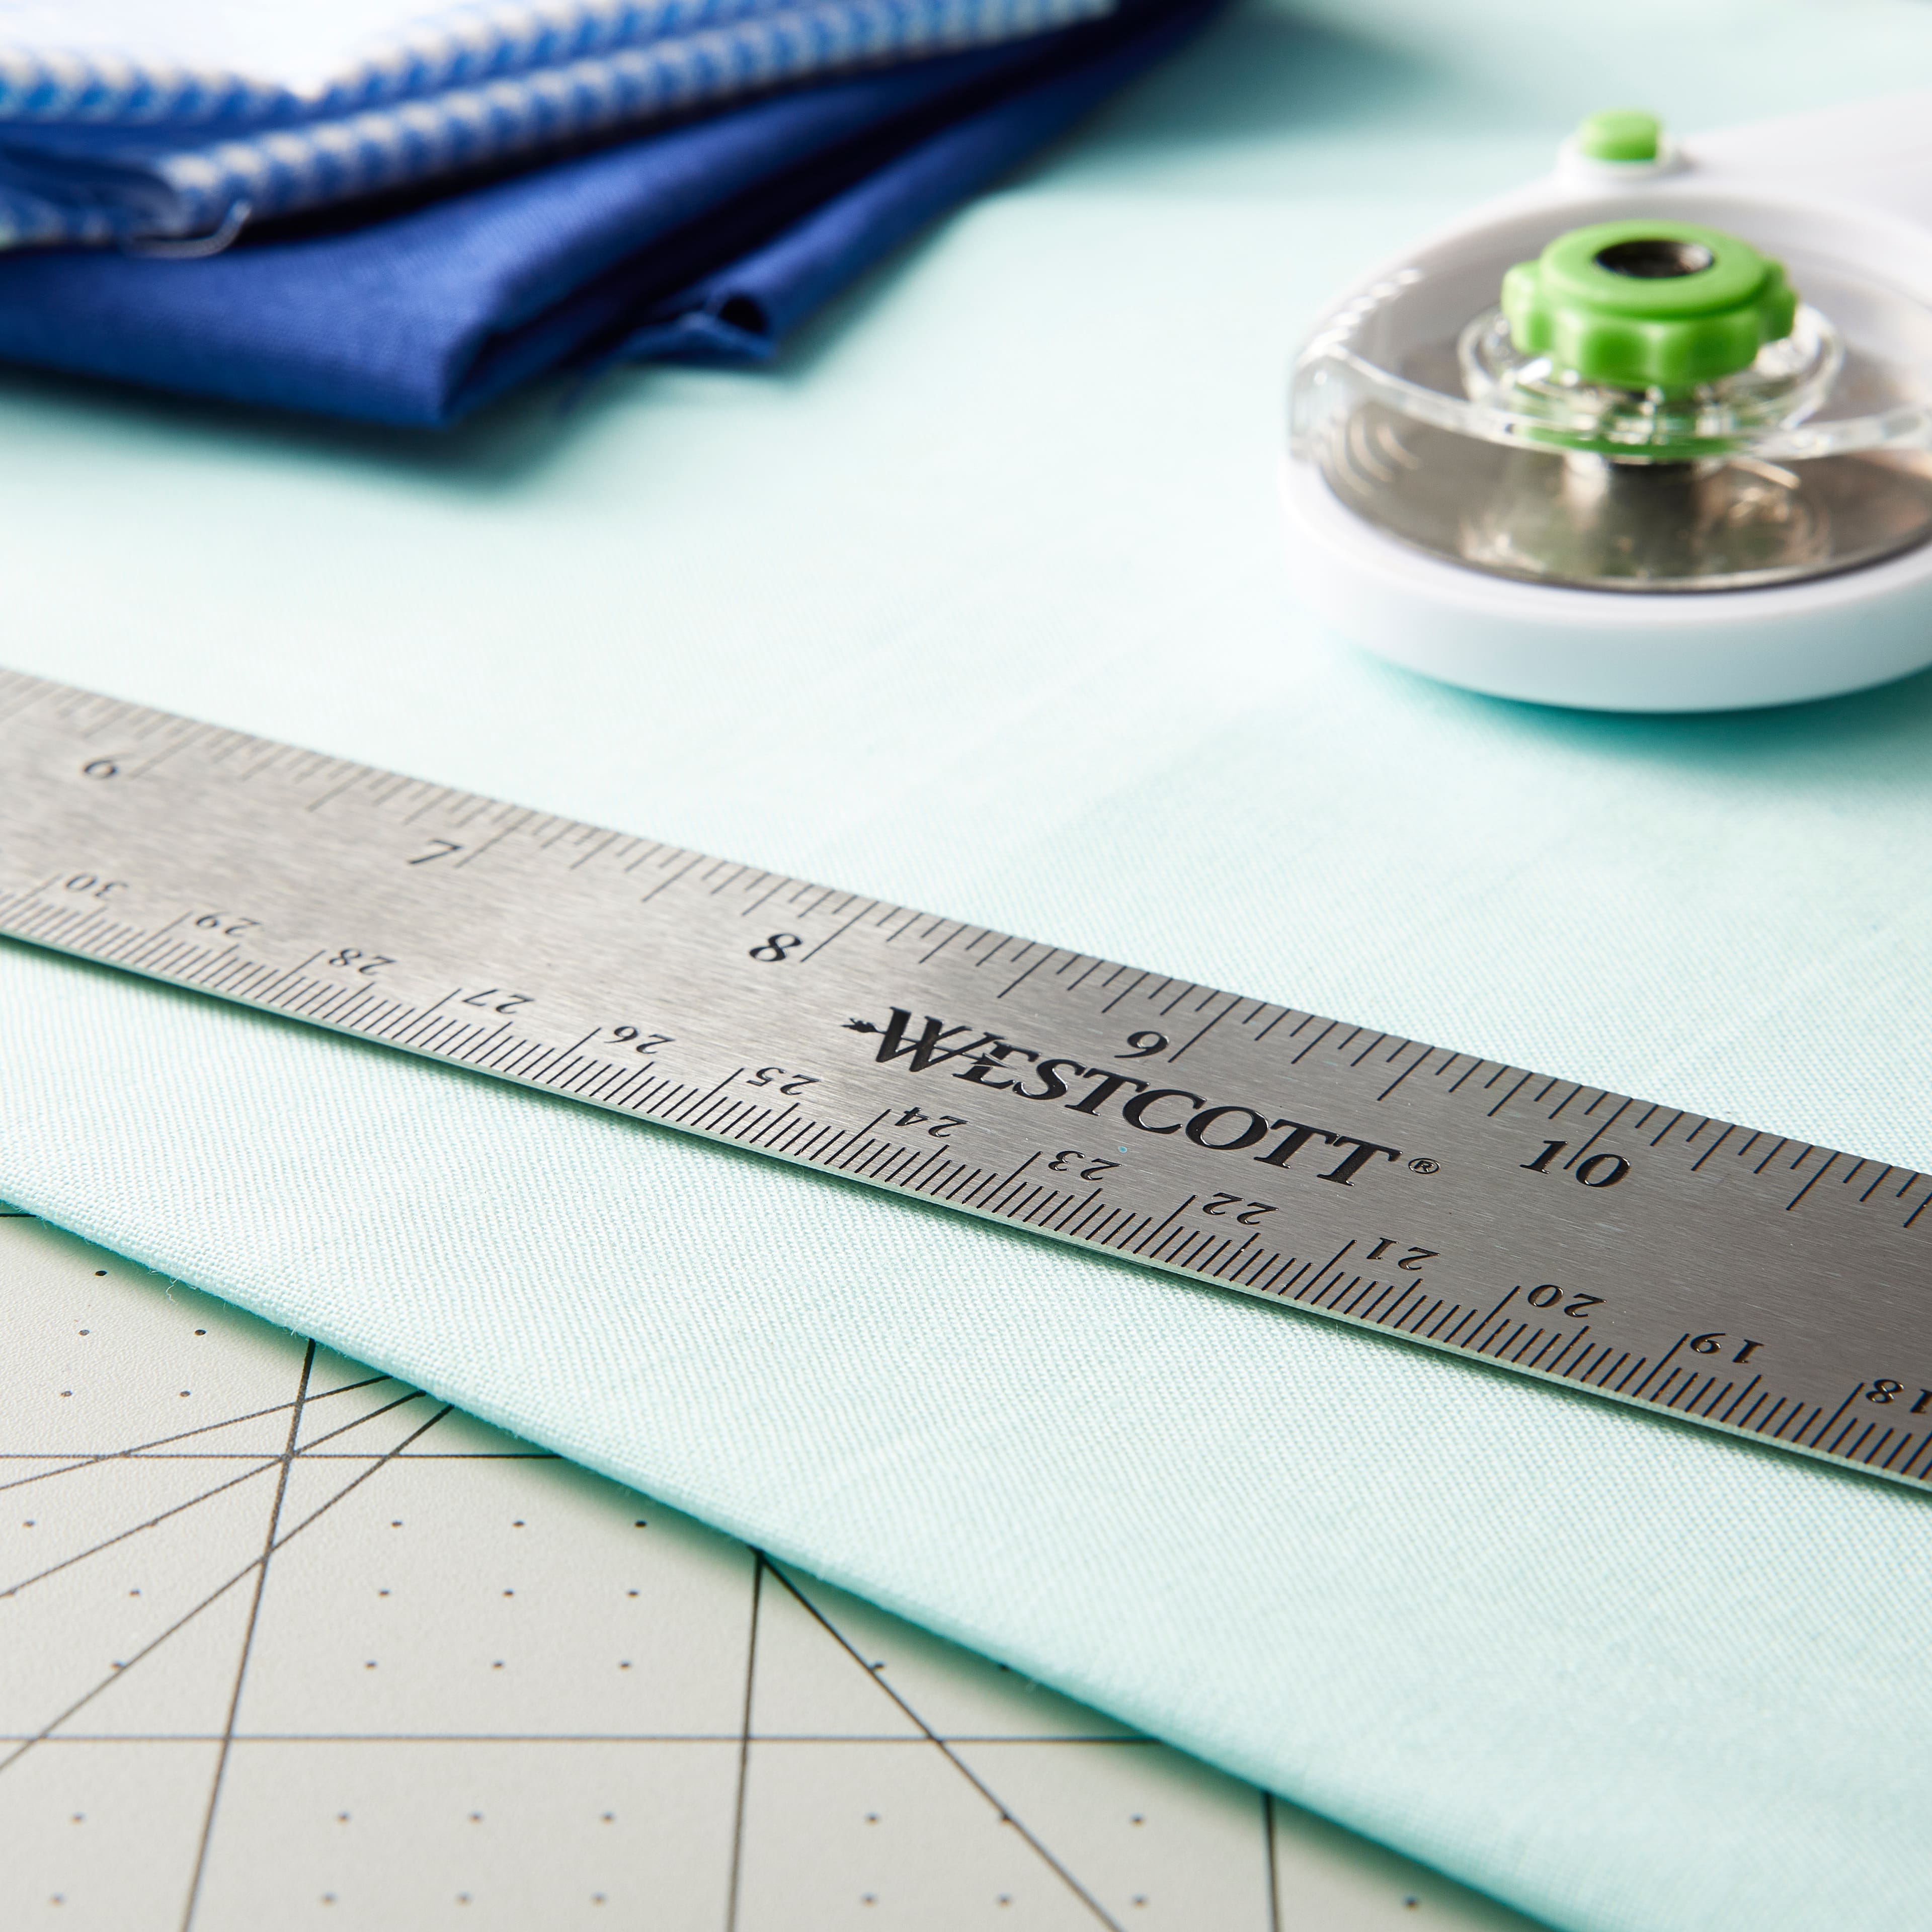 18 Inch Stainless Steel Metal Ruler - The Compleat Sculptor